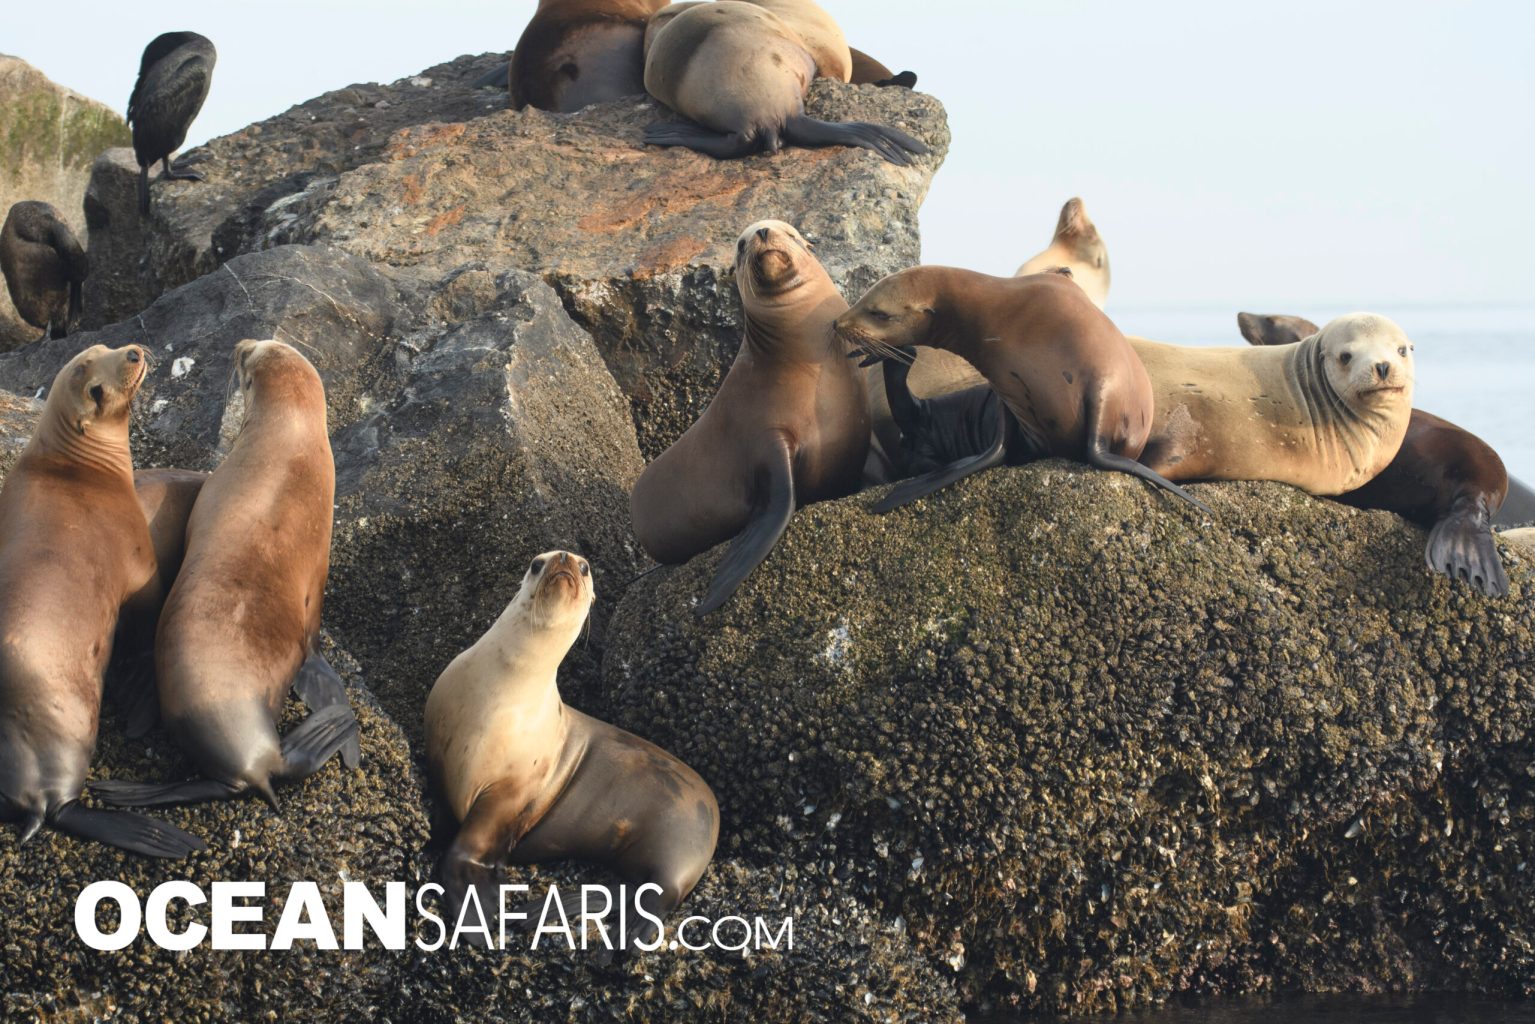 Sea Lions hauled out the rocks